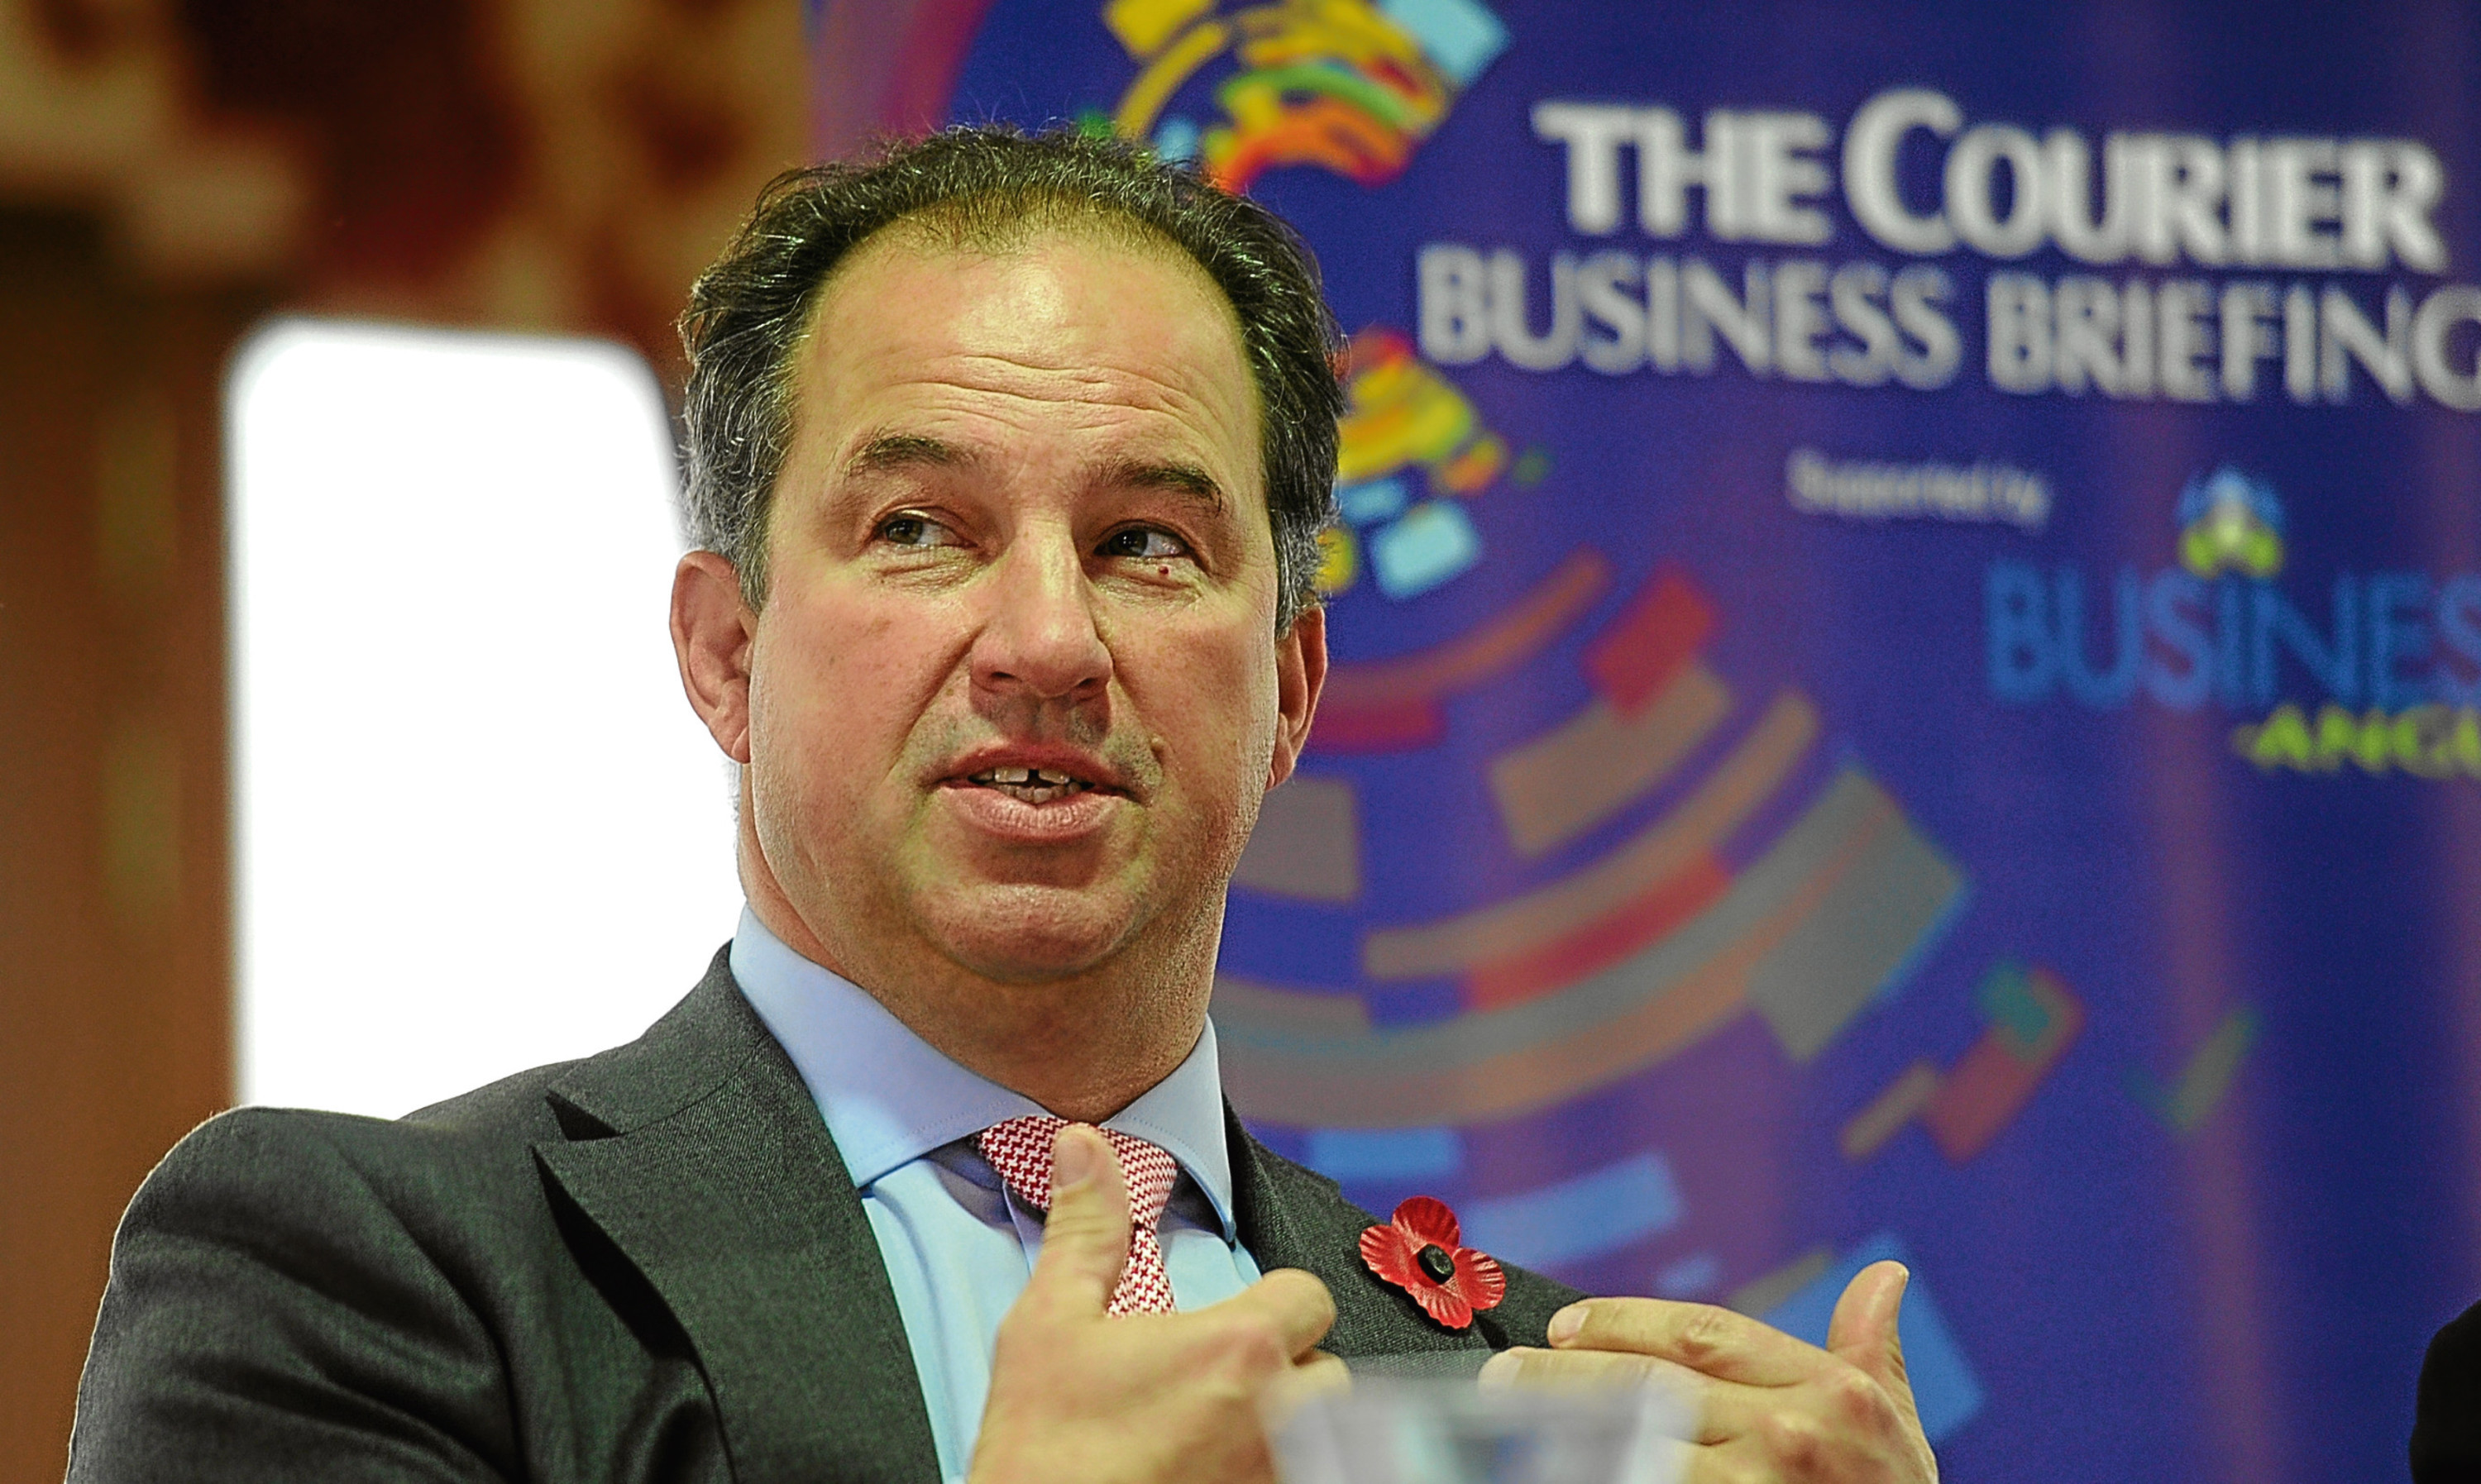 New Scottish Chambers of Commerce president Tim Allan makes a point during a business forum